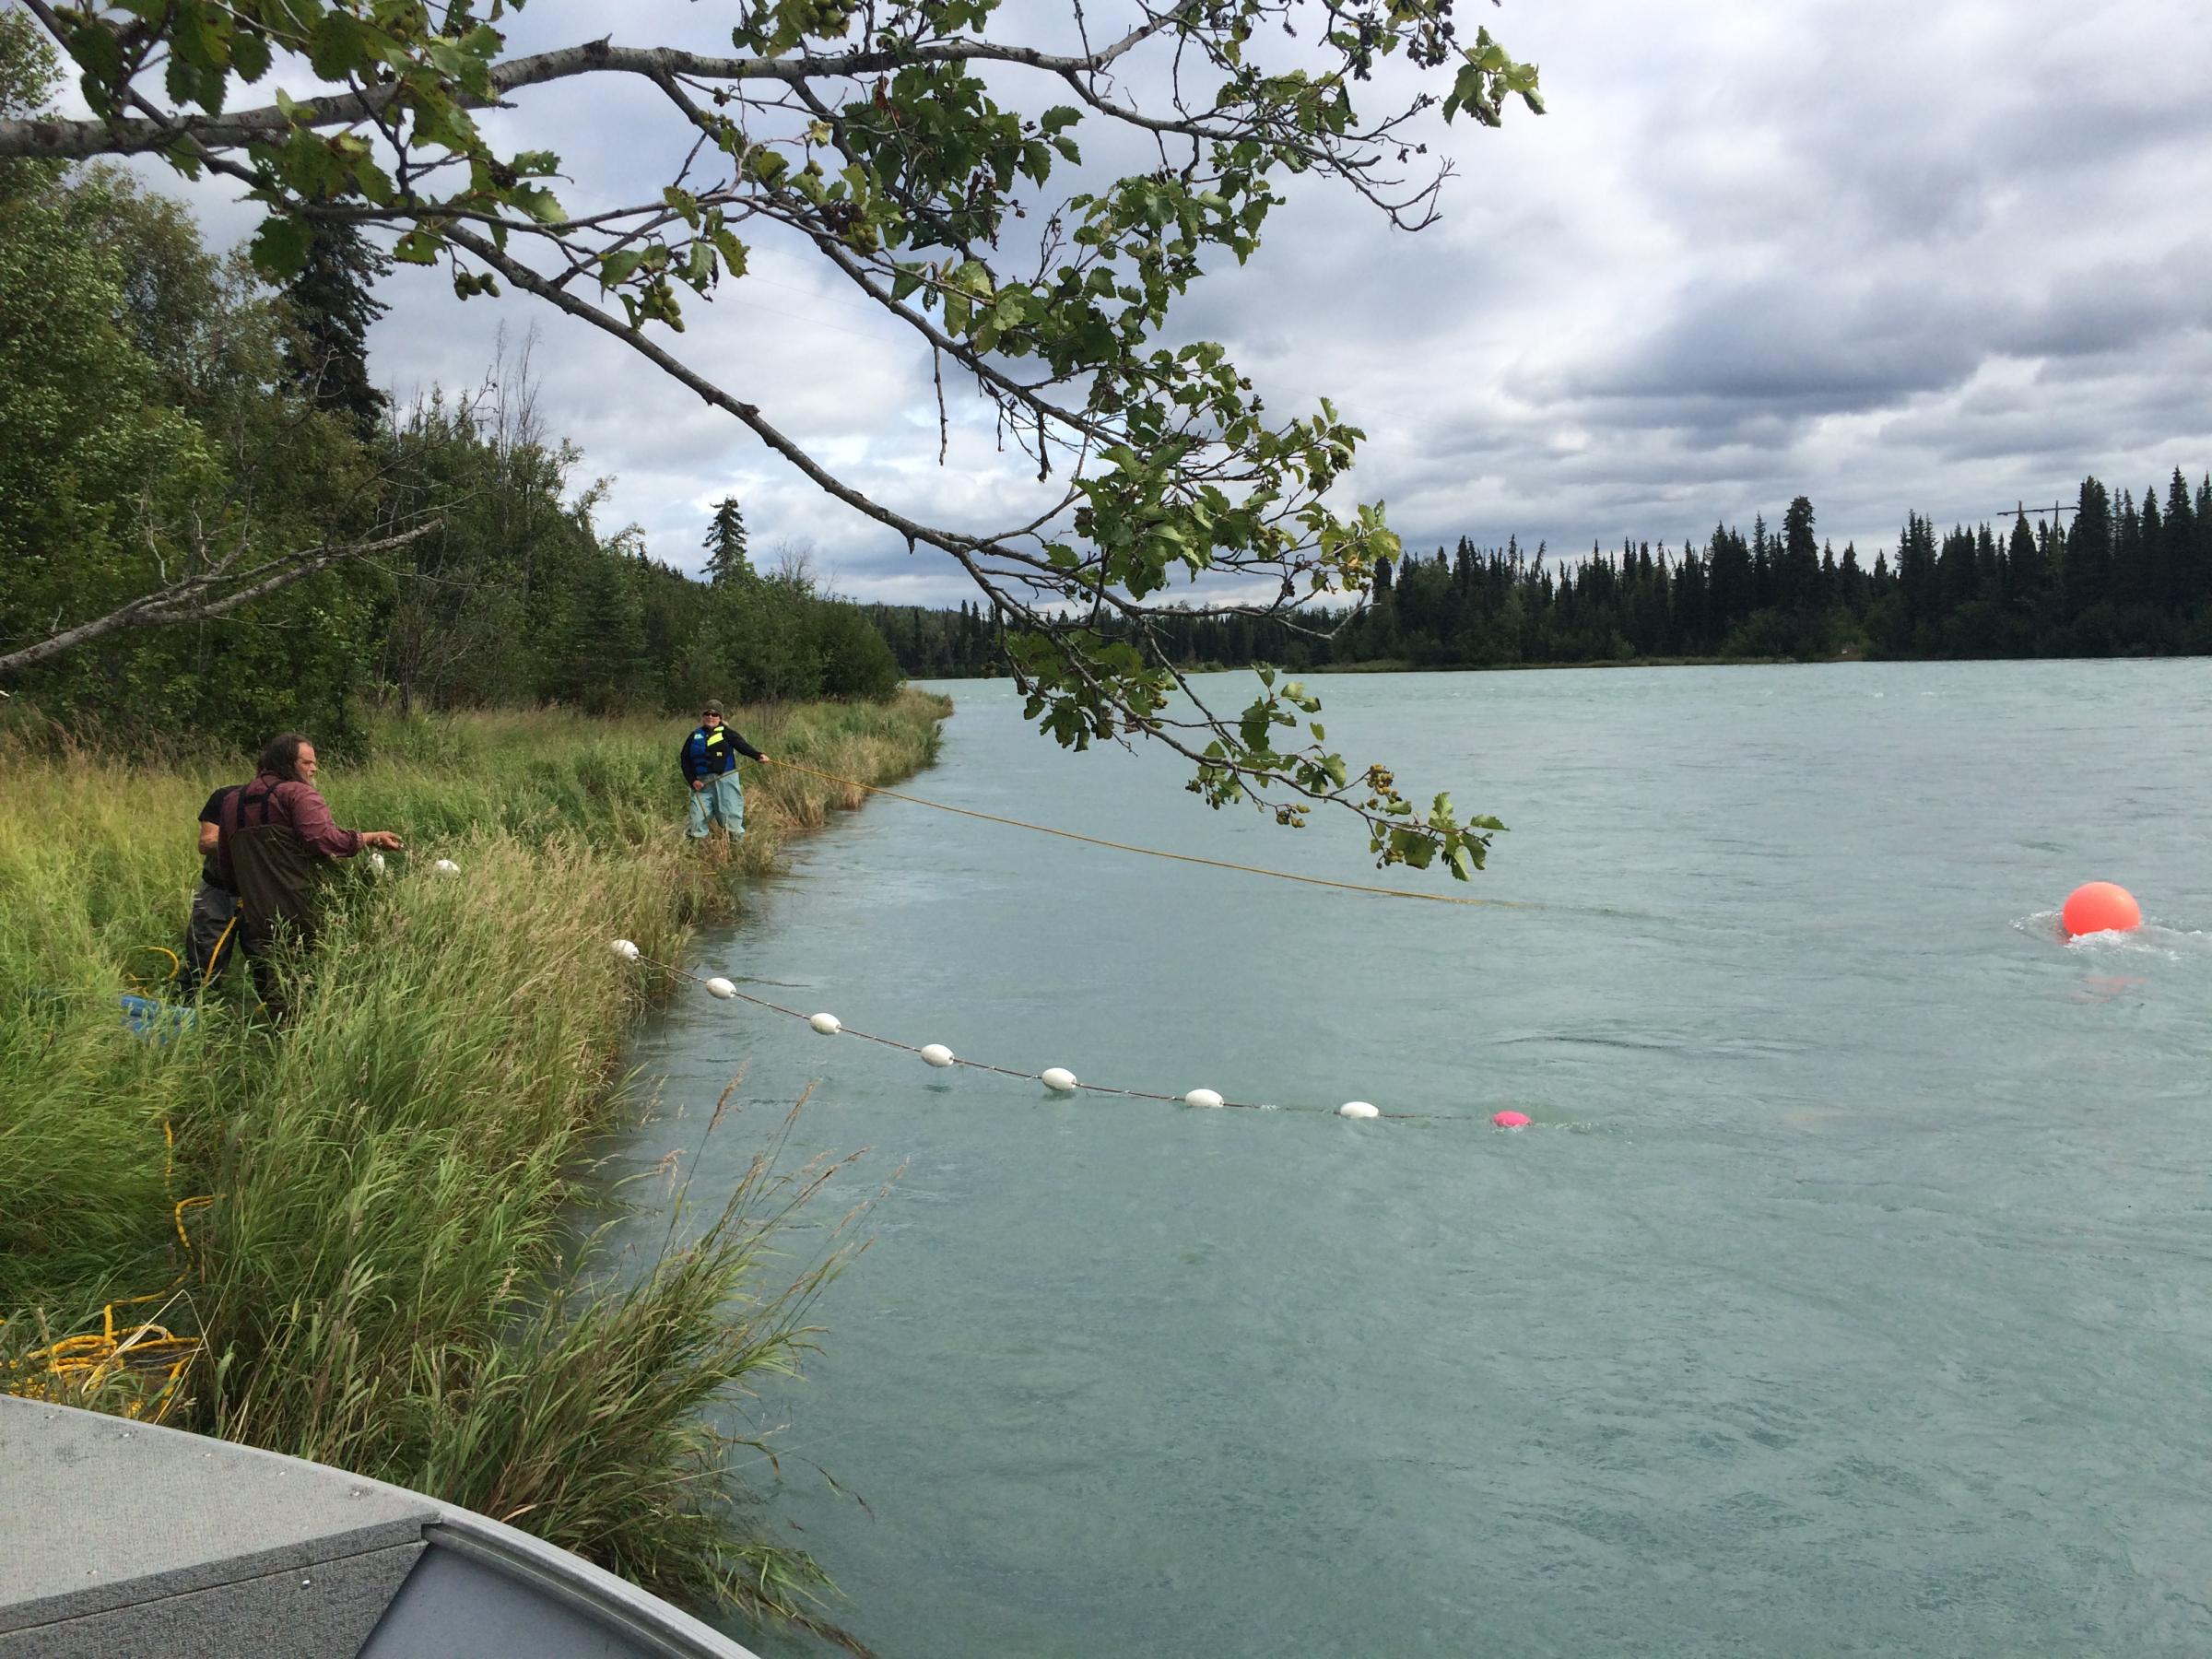 The NTC crew sets the tribe's gill net on the Kenai River in the Moose Meadows Range area on Saturday, July 30. (Photo by Daysha Eaton, KBBI - Homer)